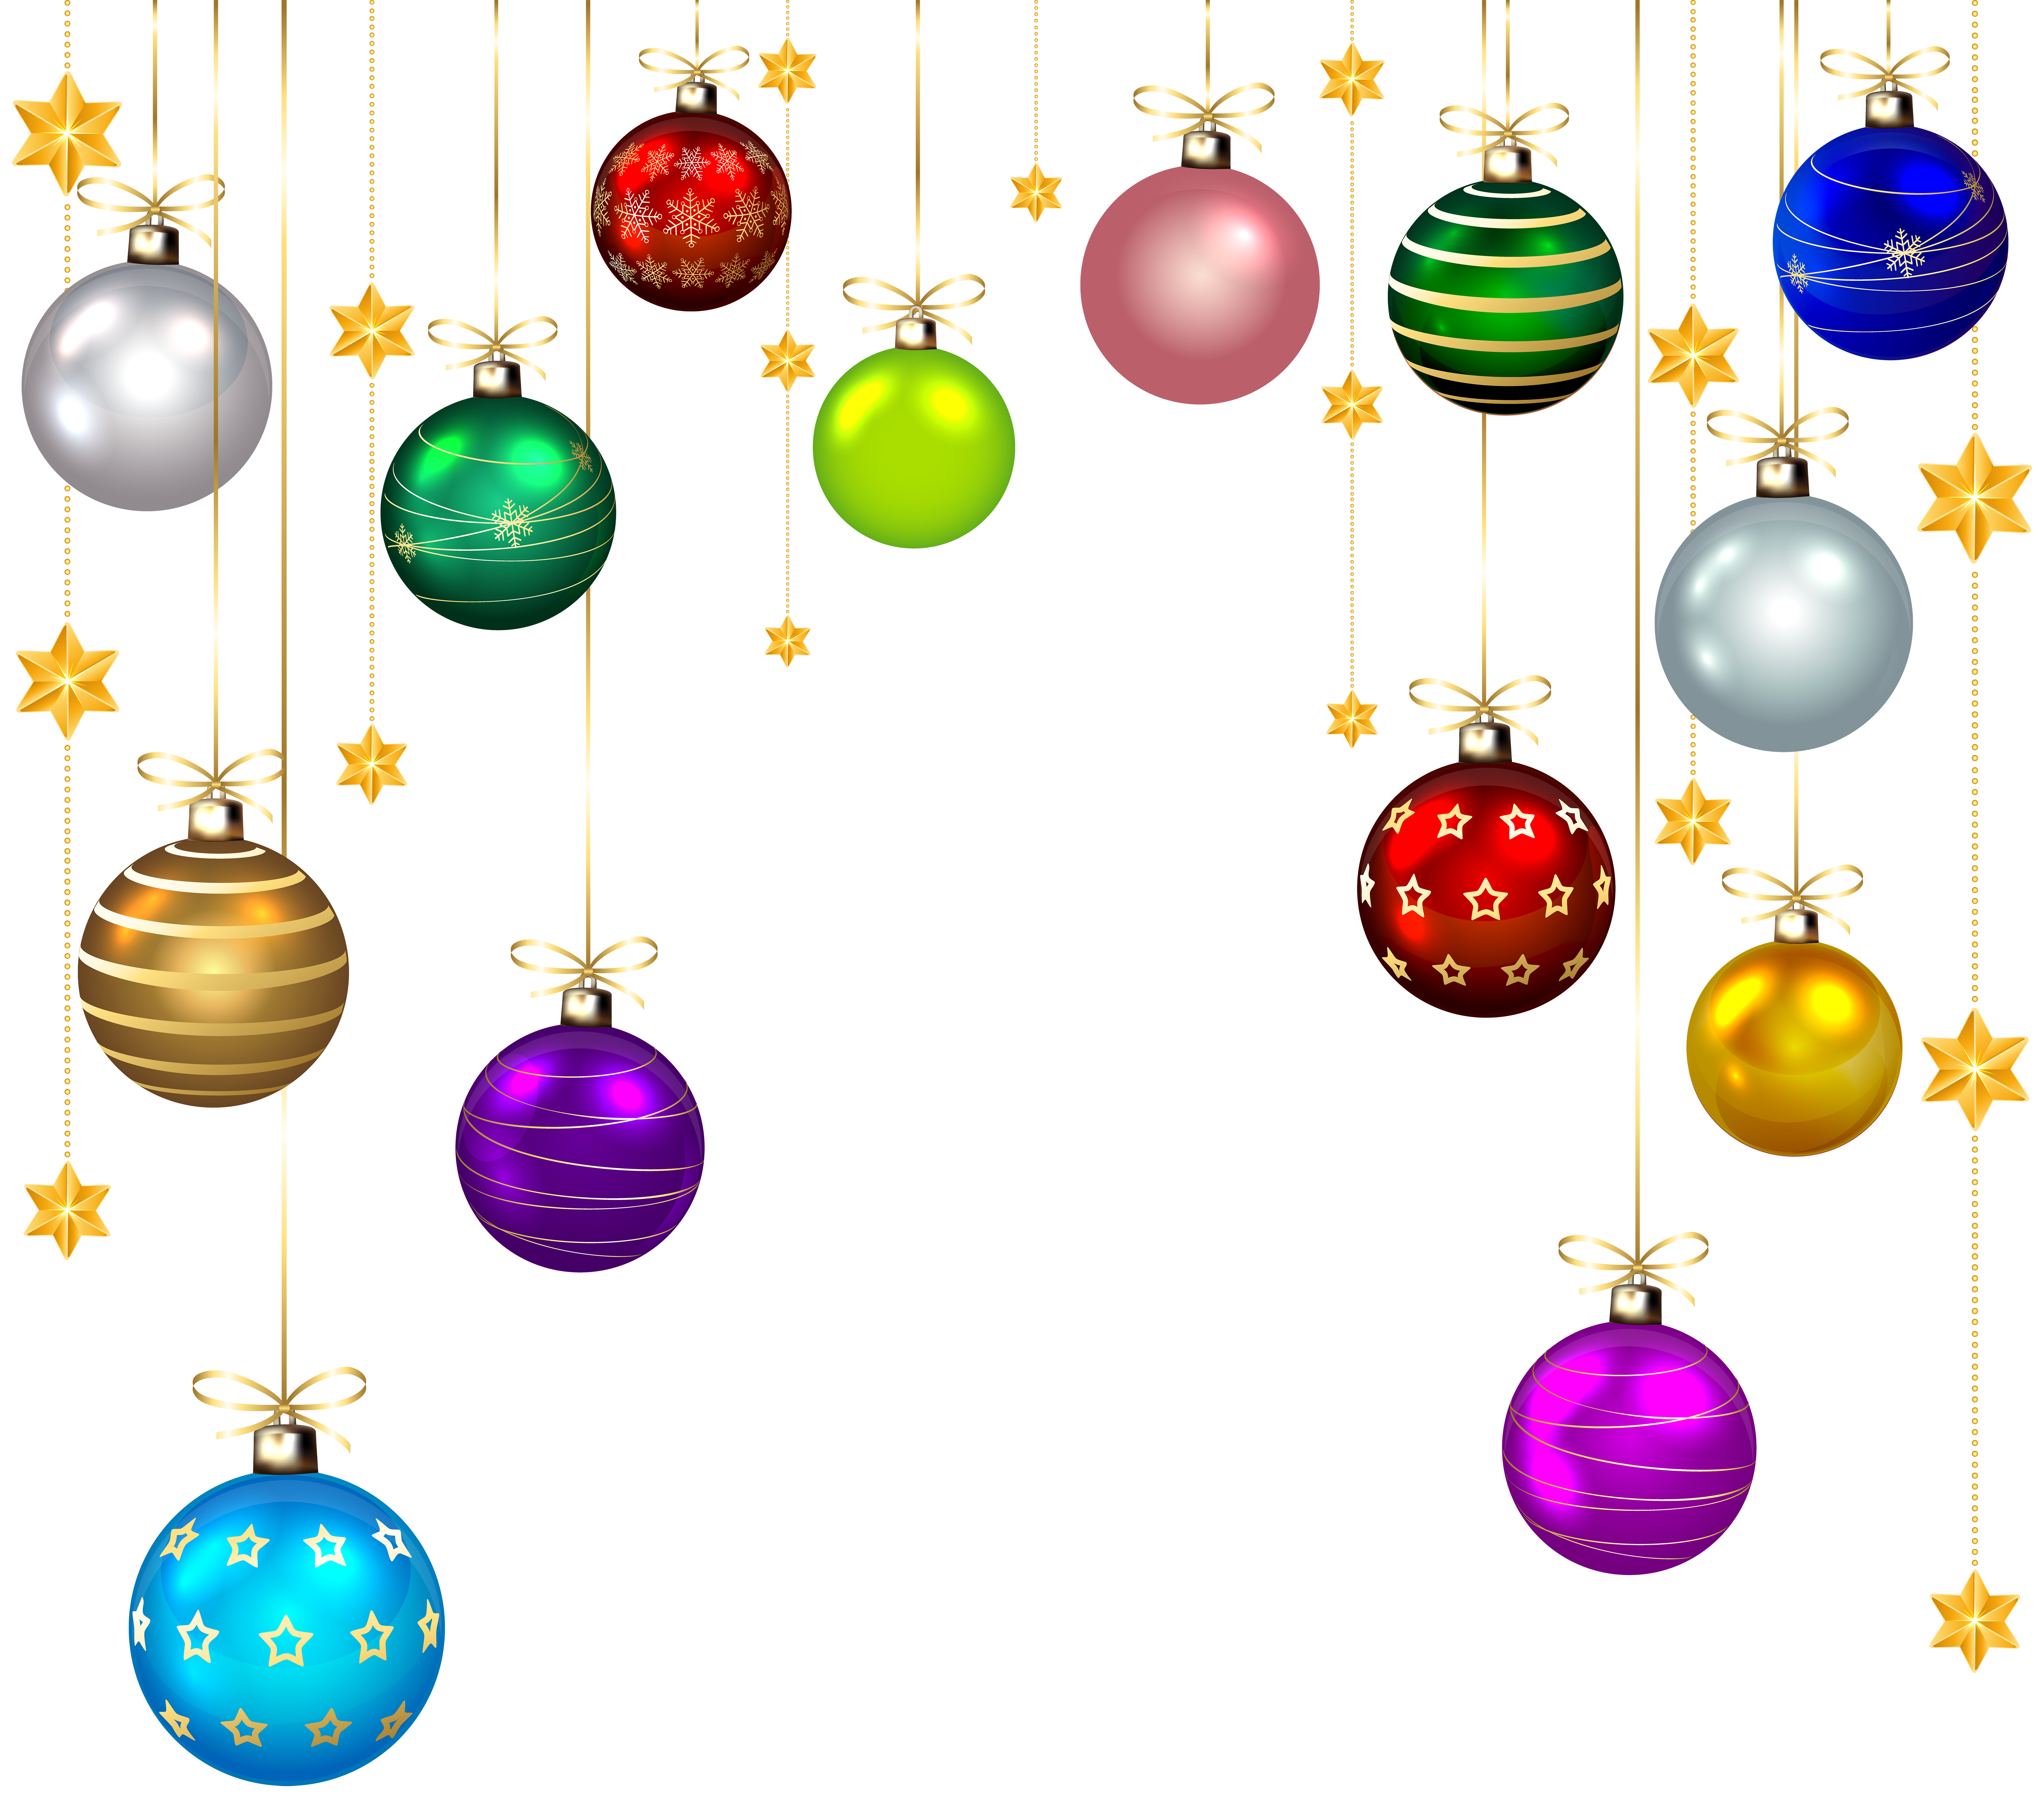 ornaments-clipart-jewellery-model-picture-1793534-ornaments-clipart-jewellery-model